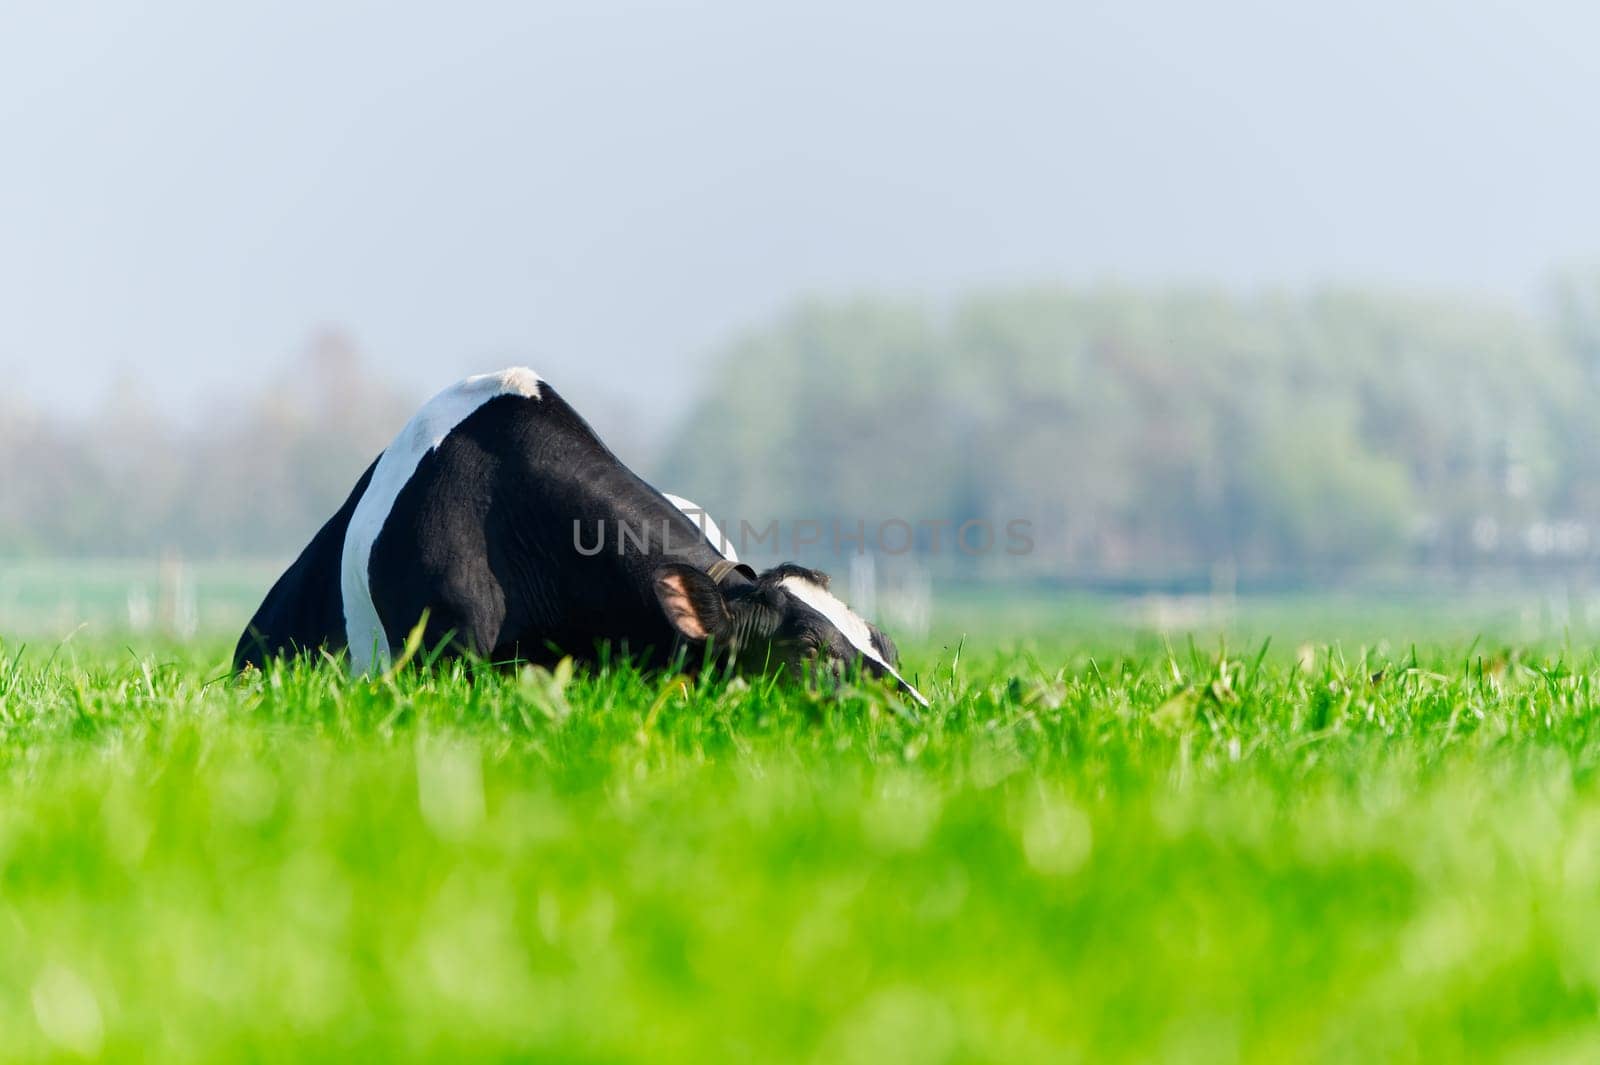 Cow on the lawn. Spotted cow grazing on beautiful green meadow. holstein cow, resting in a meadow. Black and white cow, eco farming in Nederlands.